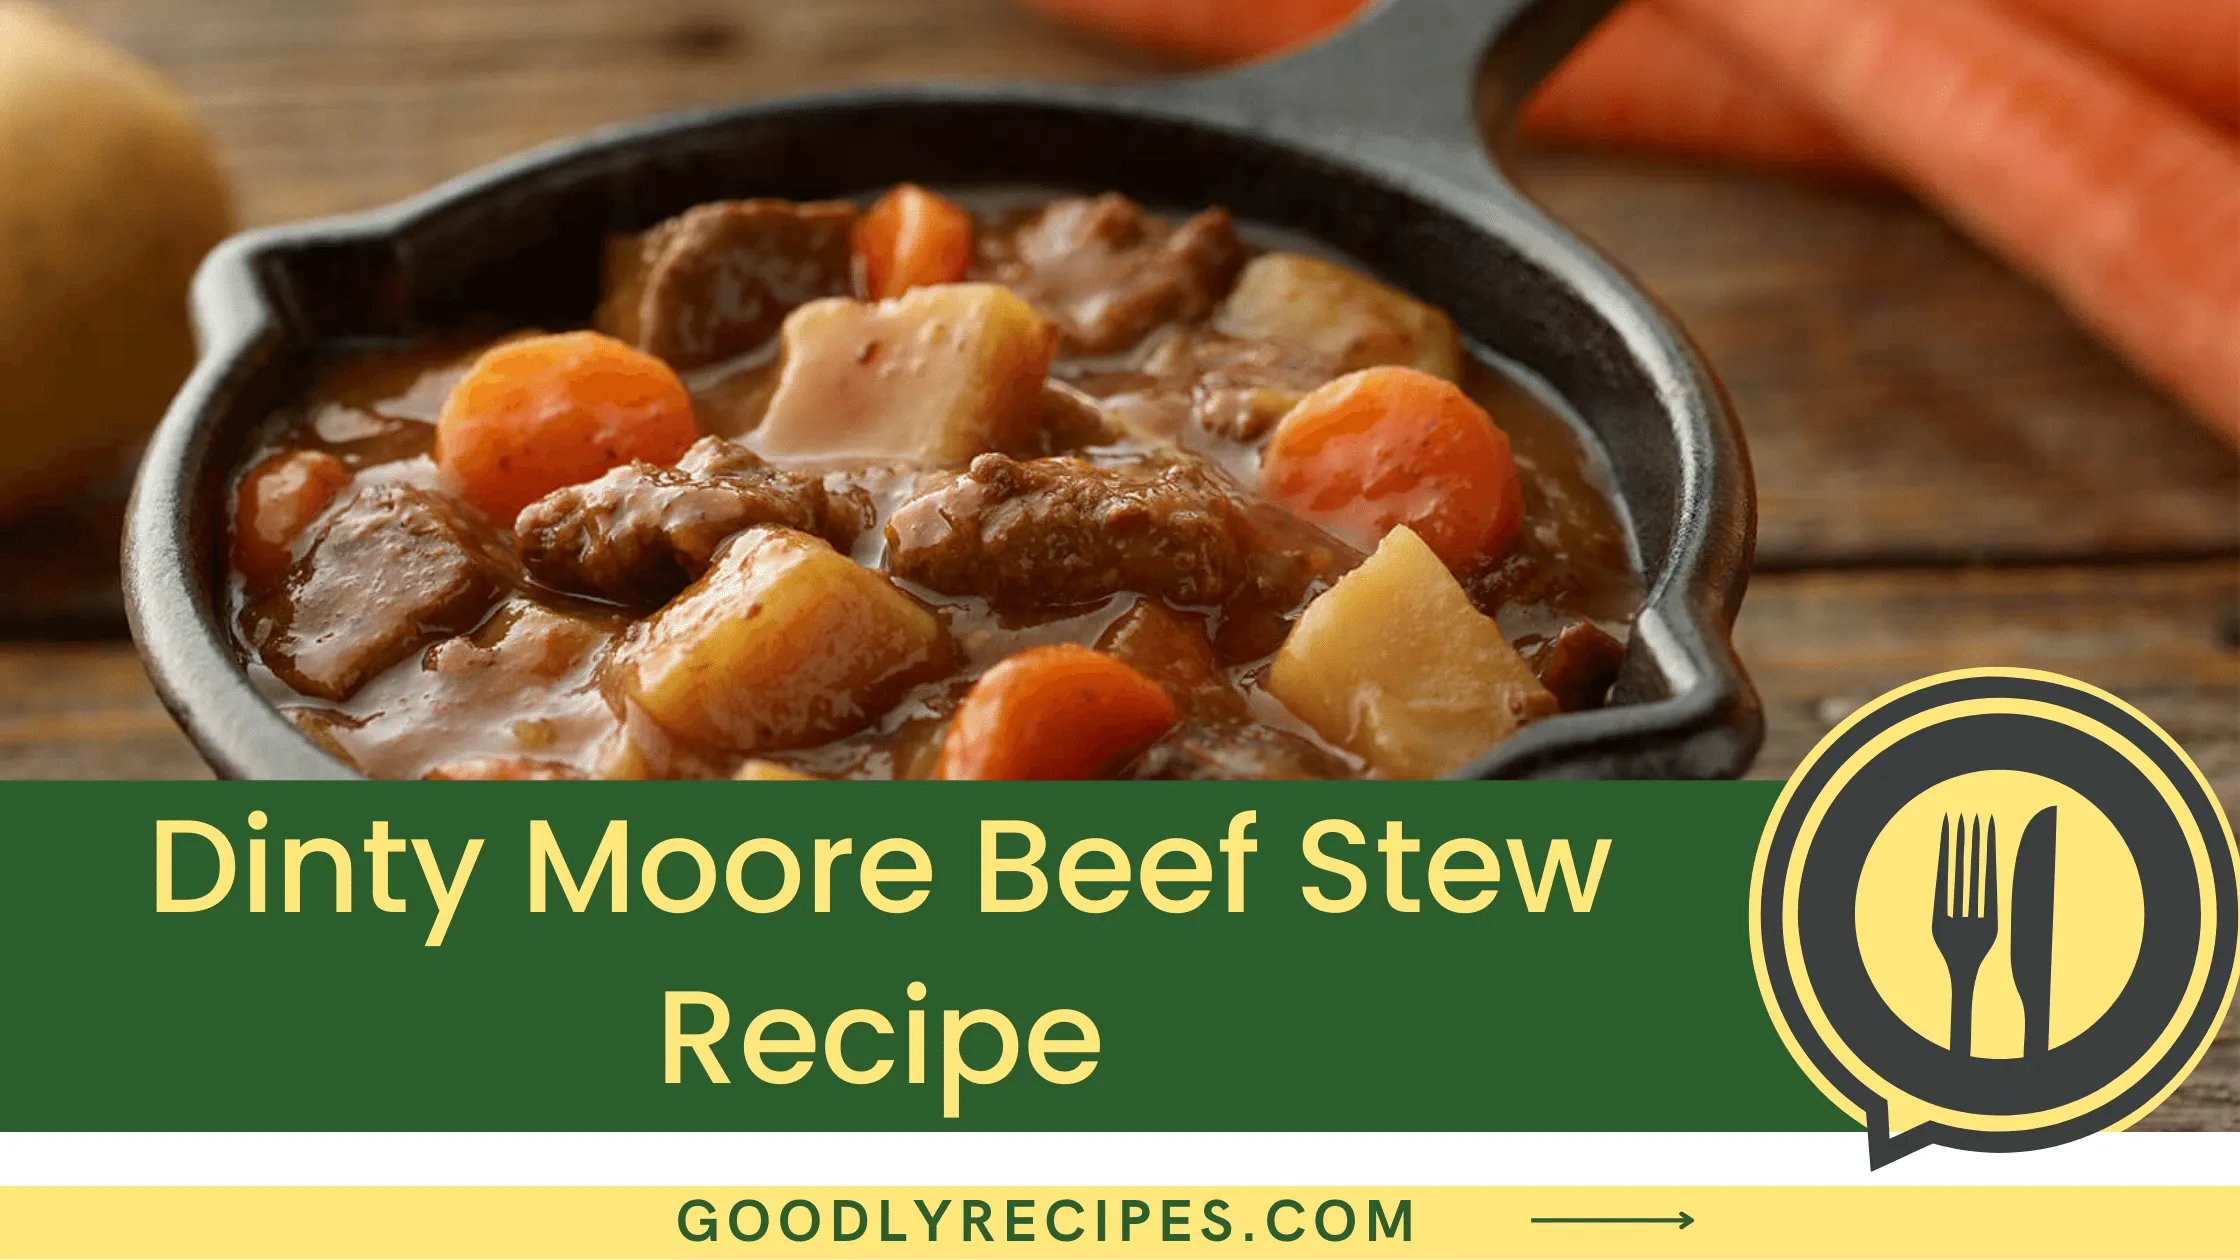 What Is Dinty Moore Beef Stew?